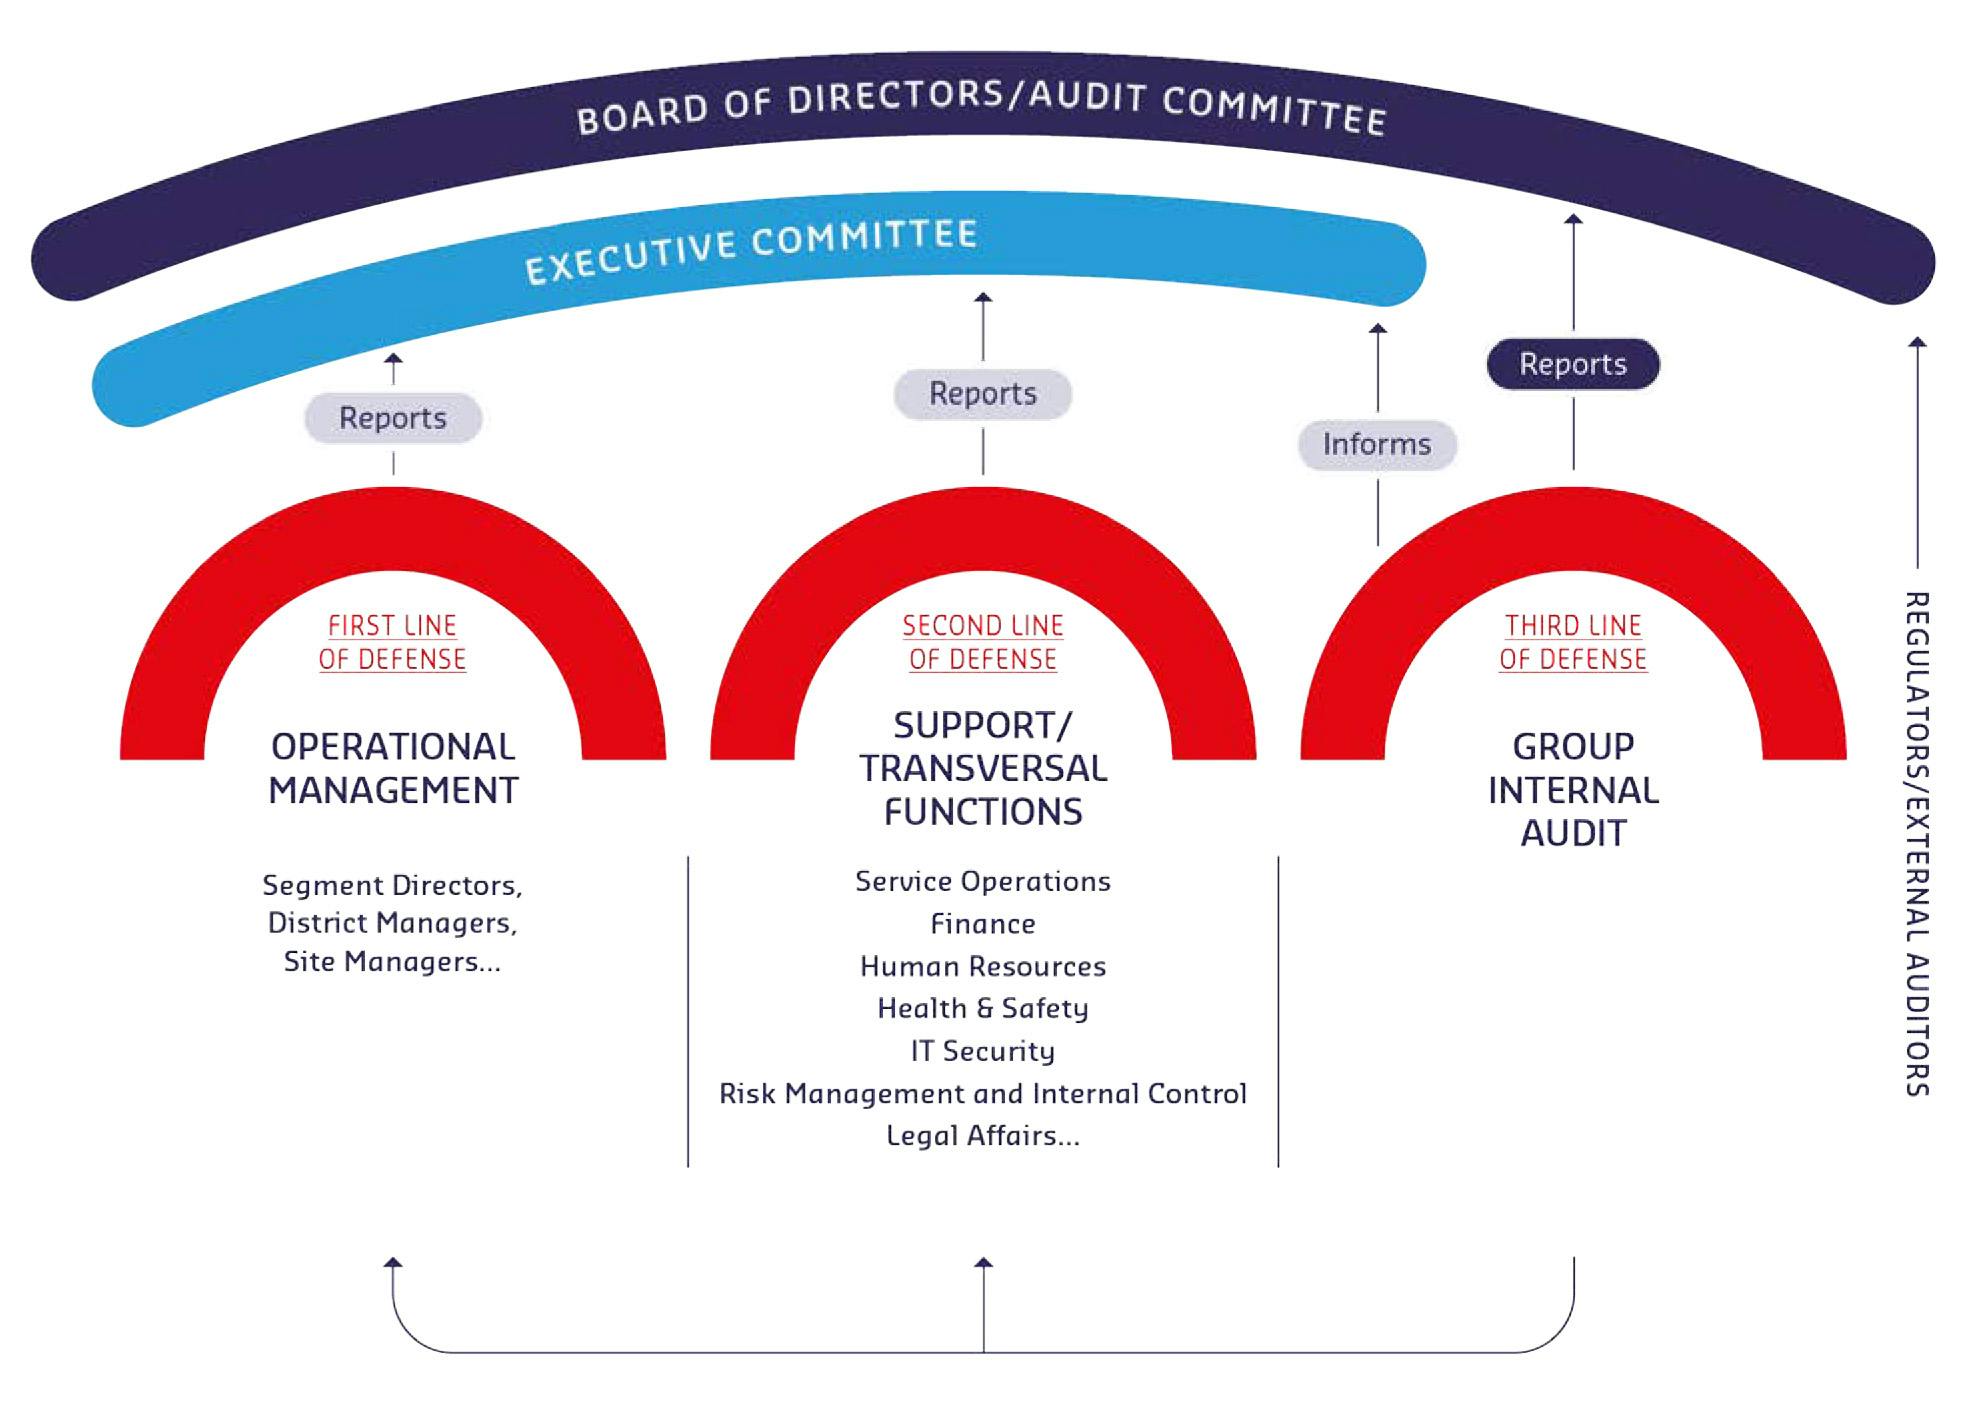 This diagram shows the sodexo’s risk management and internal control model